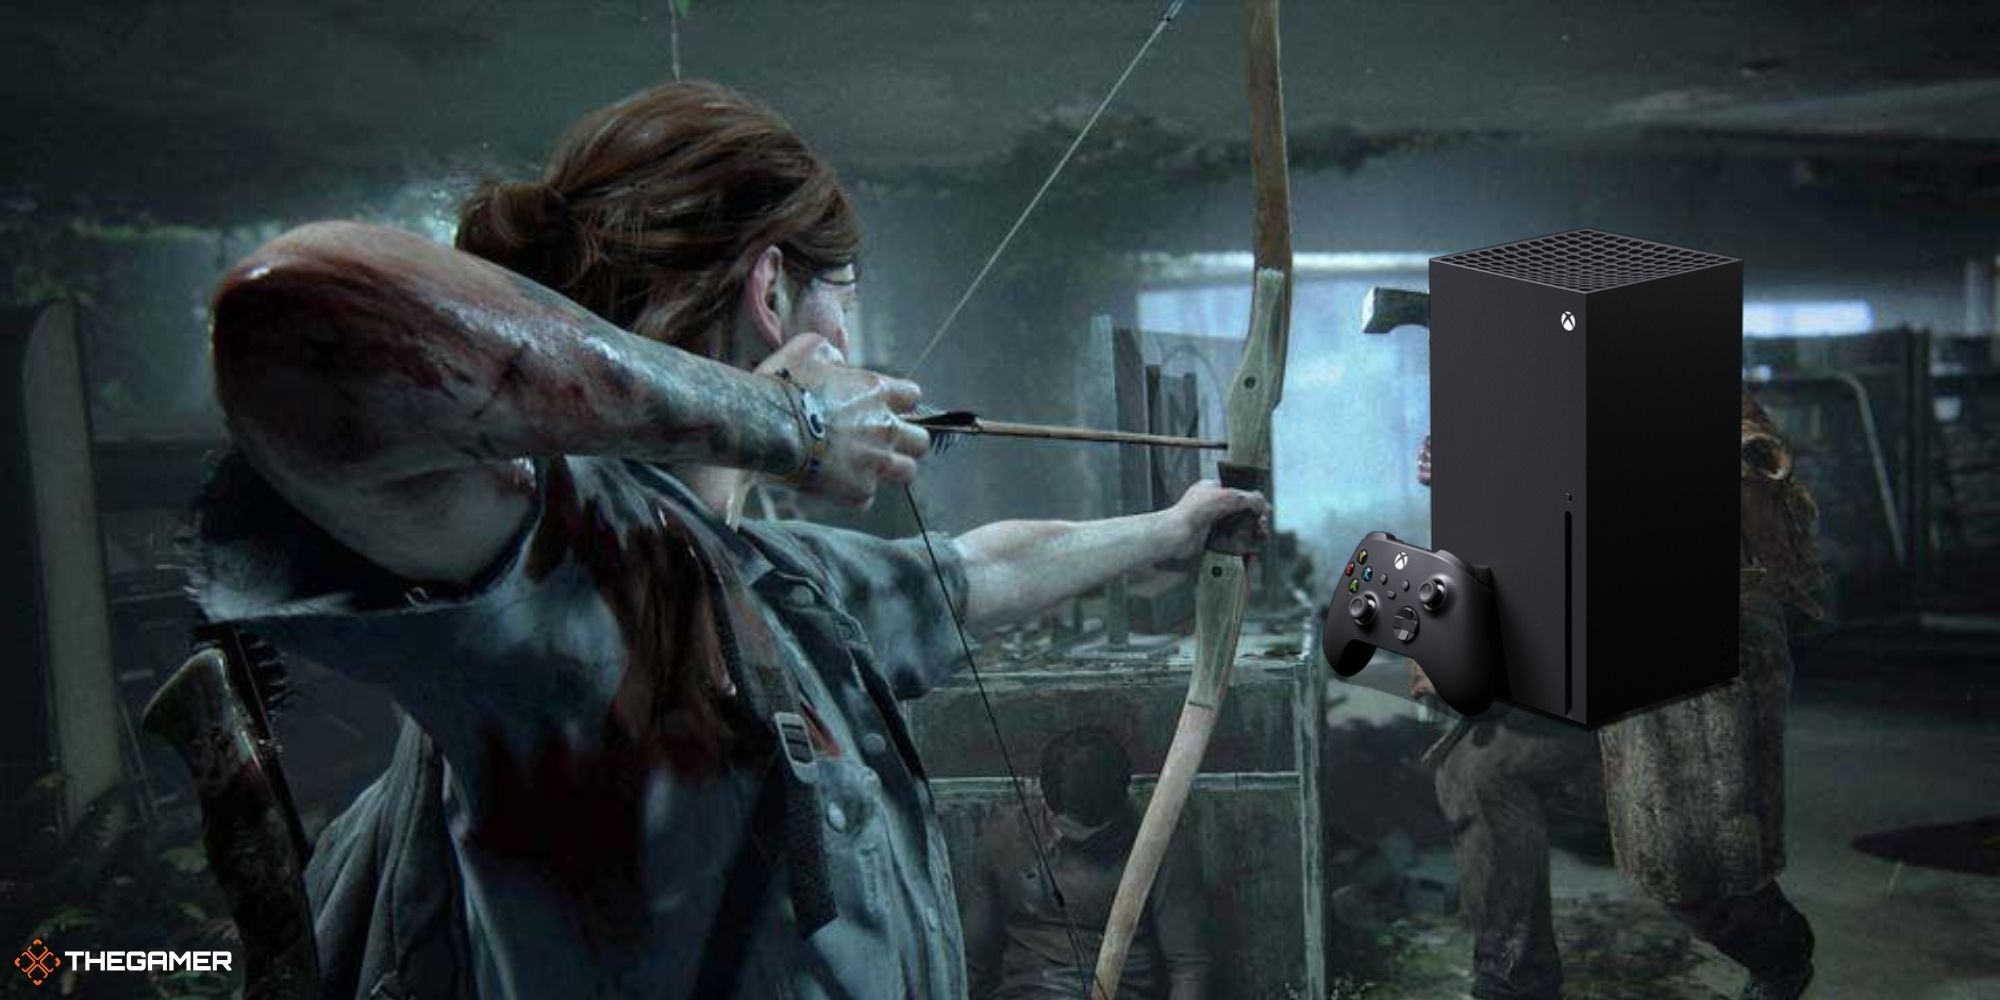 The Last Of Us - Ellie shooting an xbox